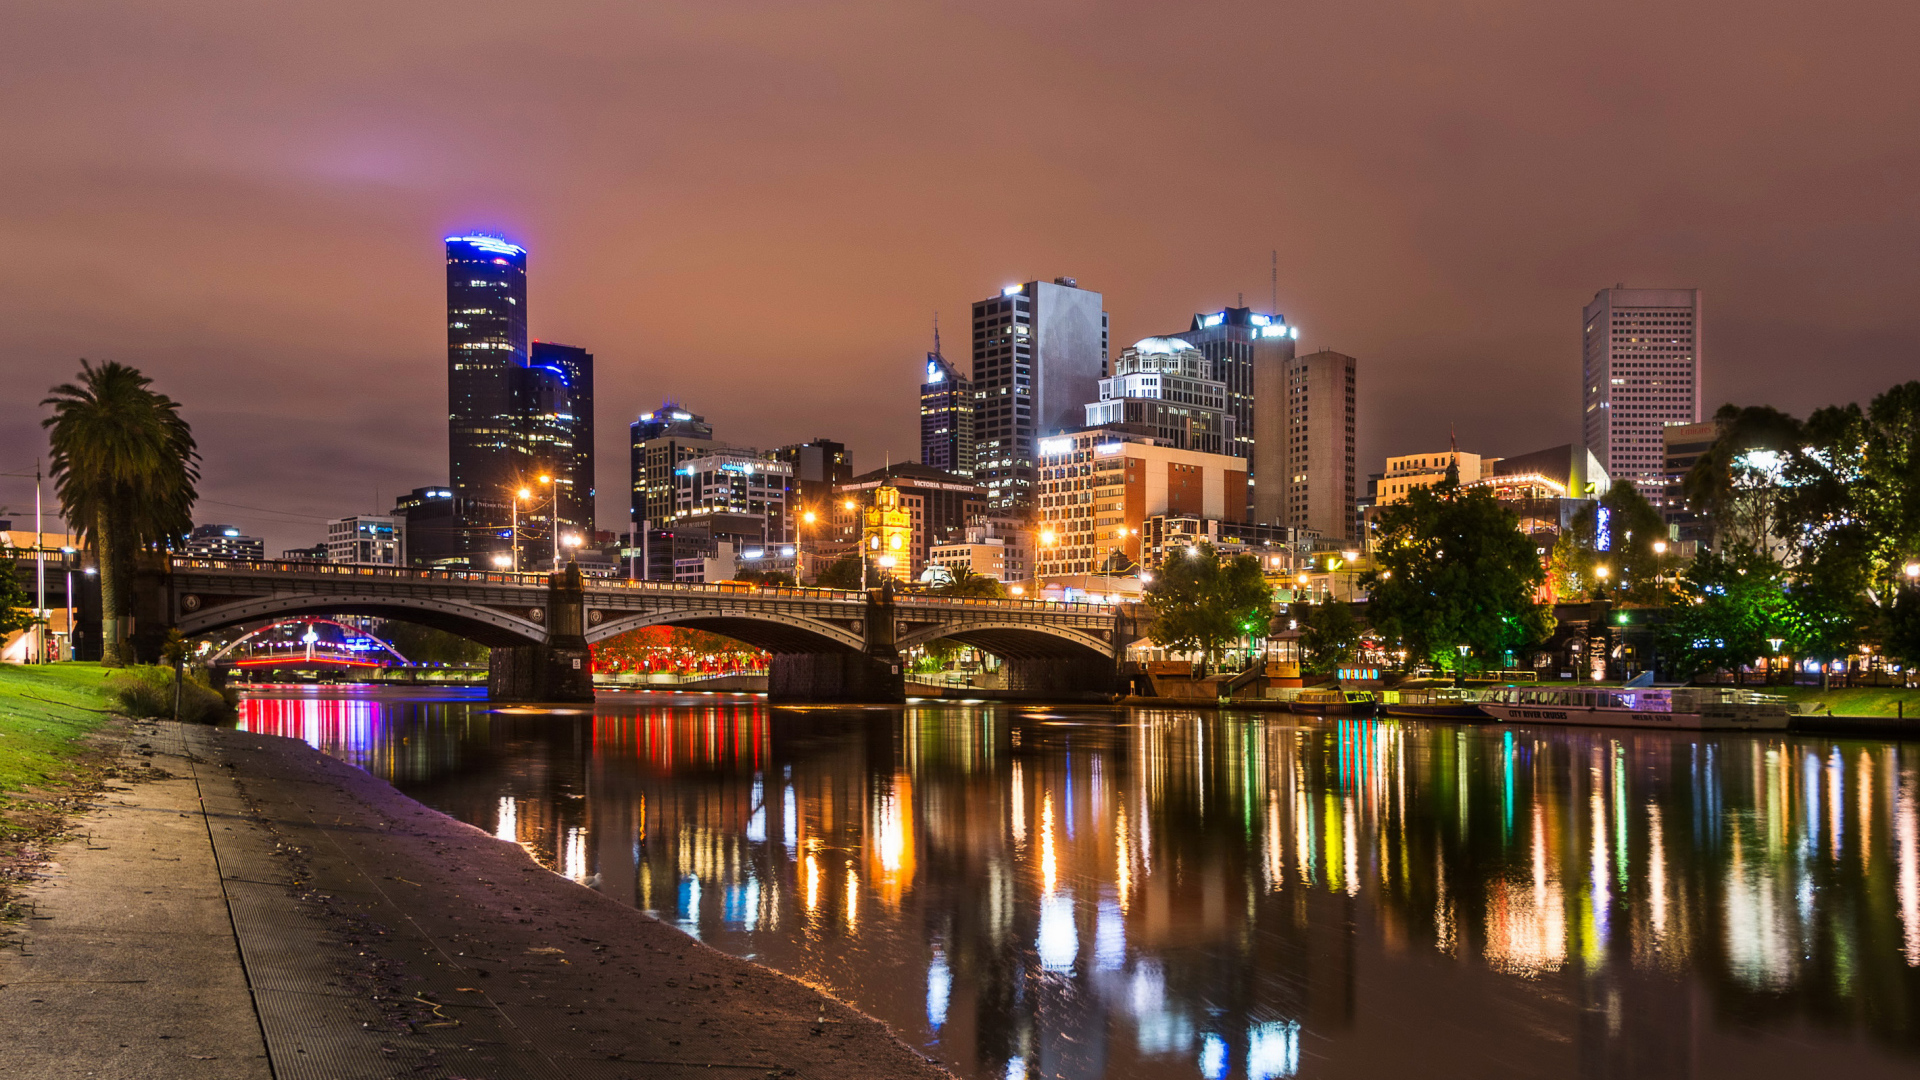 The lights of the night skyscrapers of the city of Melbourne are reflected in the water channel. Australia